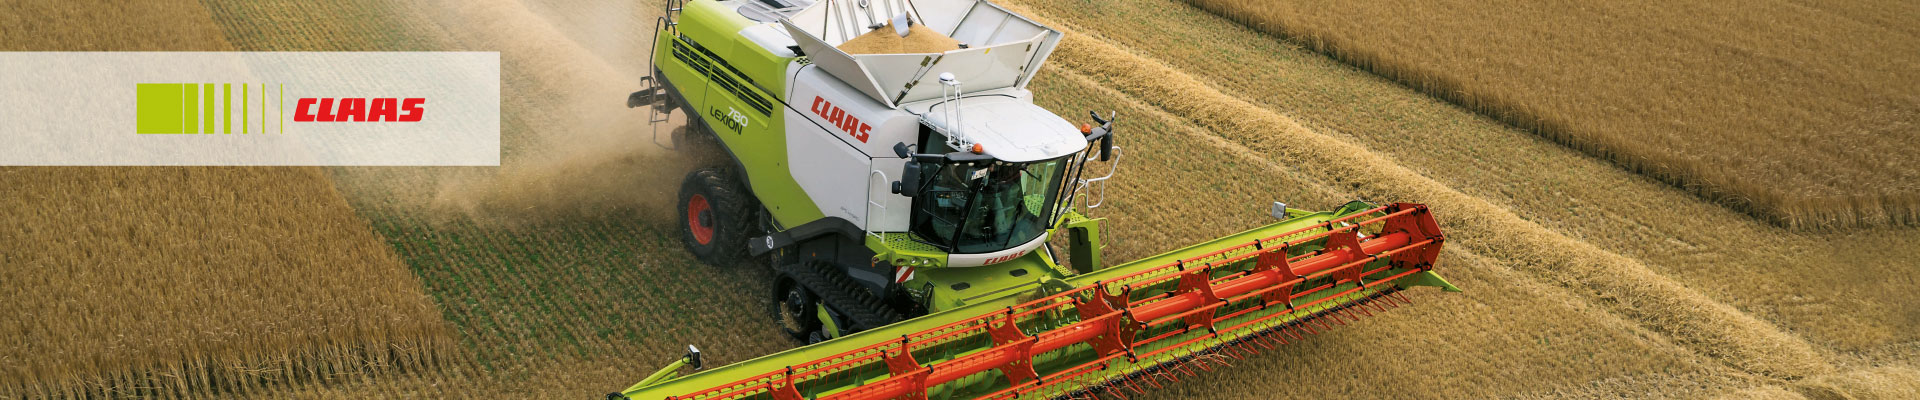 Success Story CLAAS and ORBIS